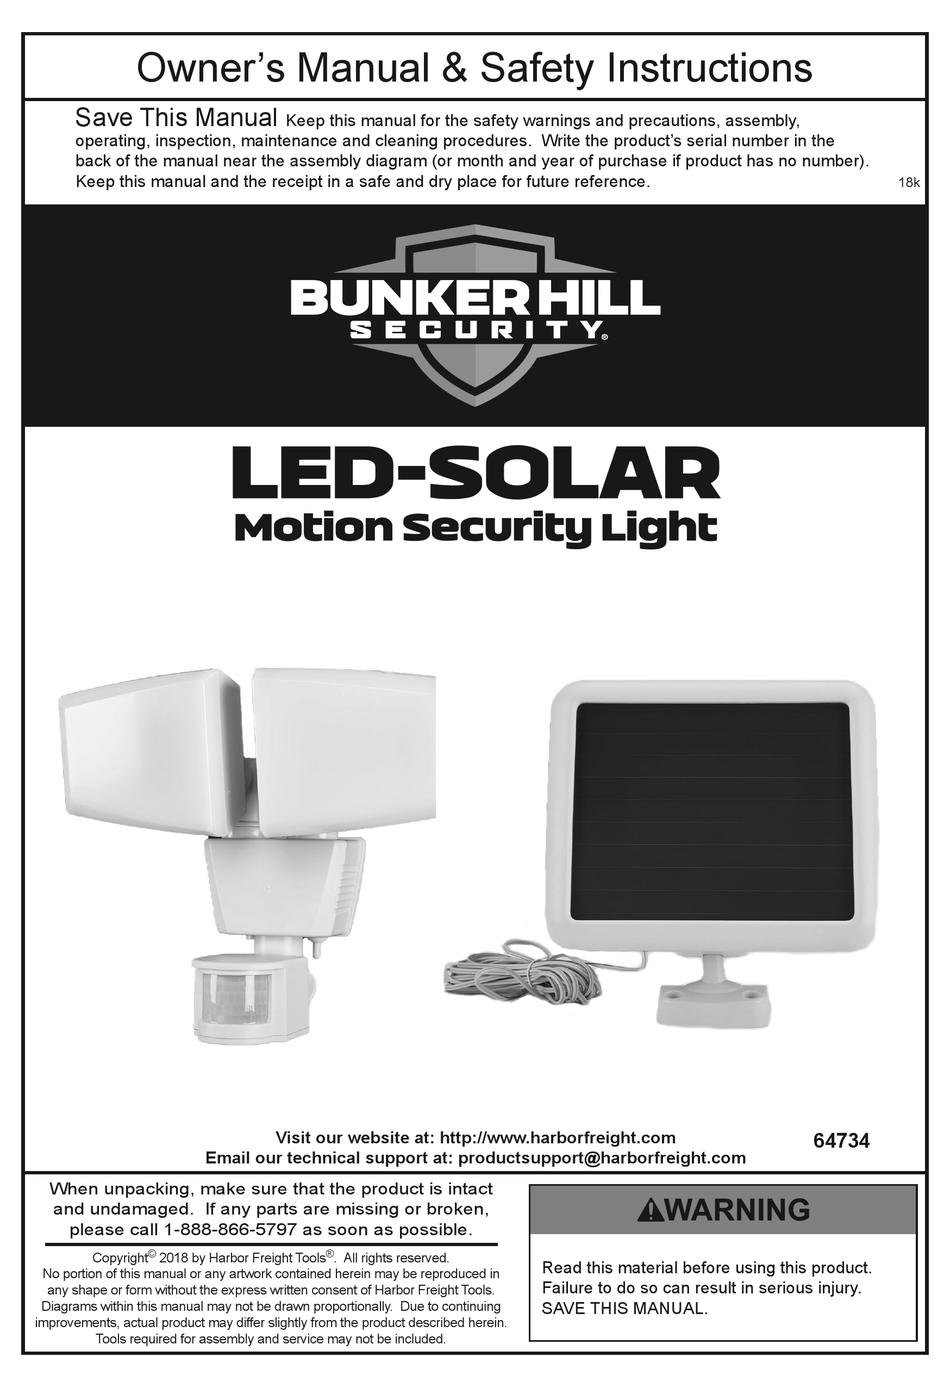 Bunker Hill Security Motion Detector Alarm Set Instructions - Includes